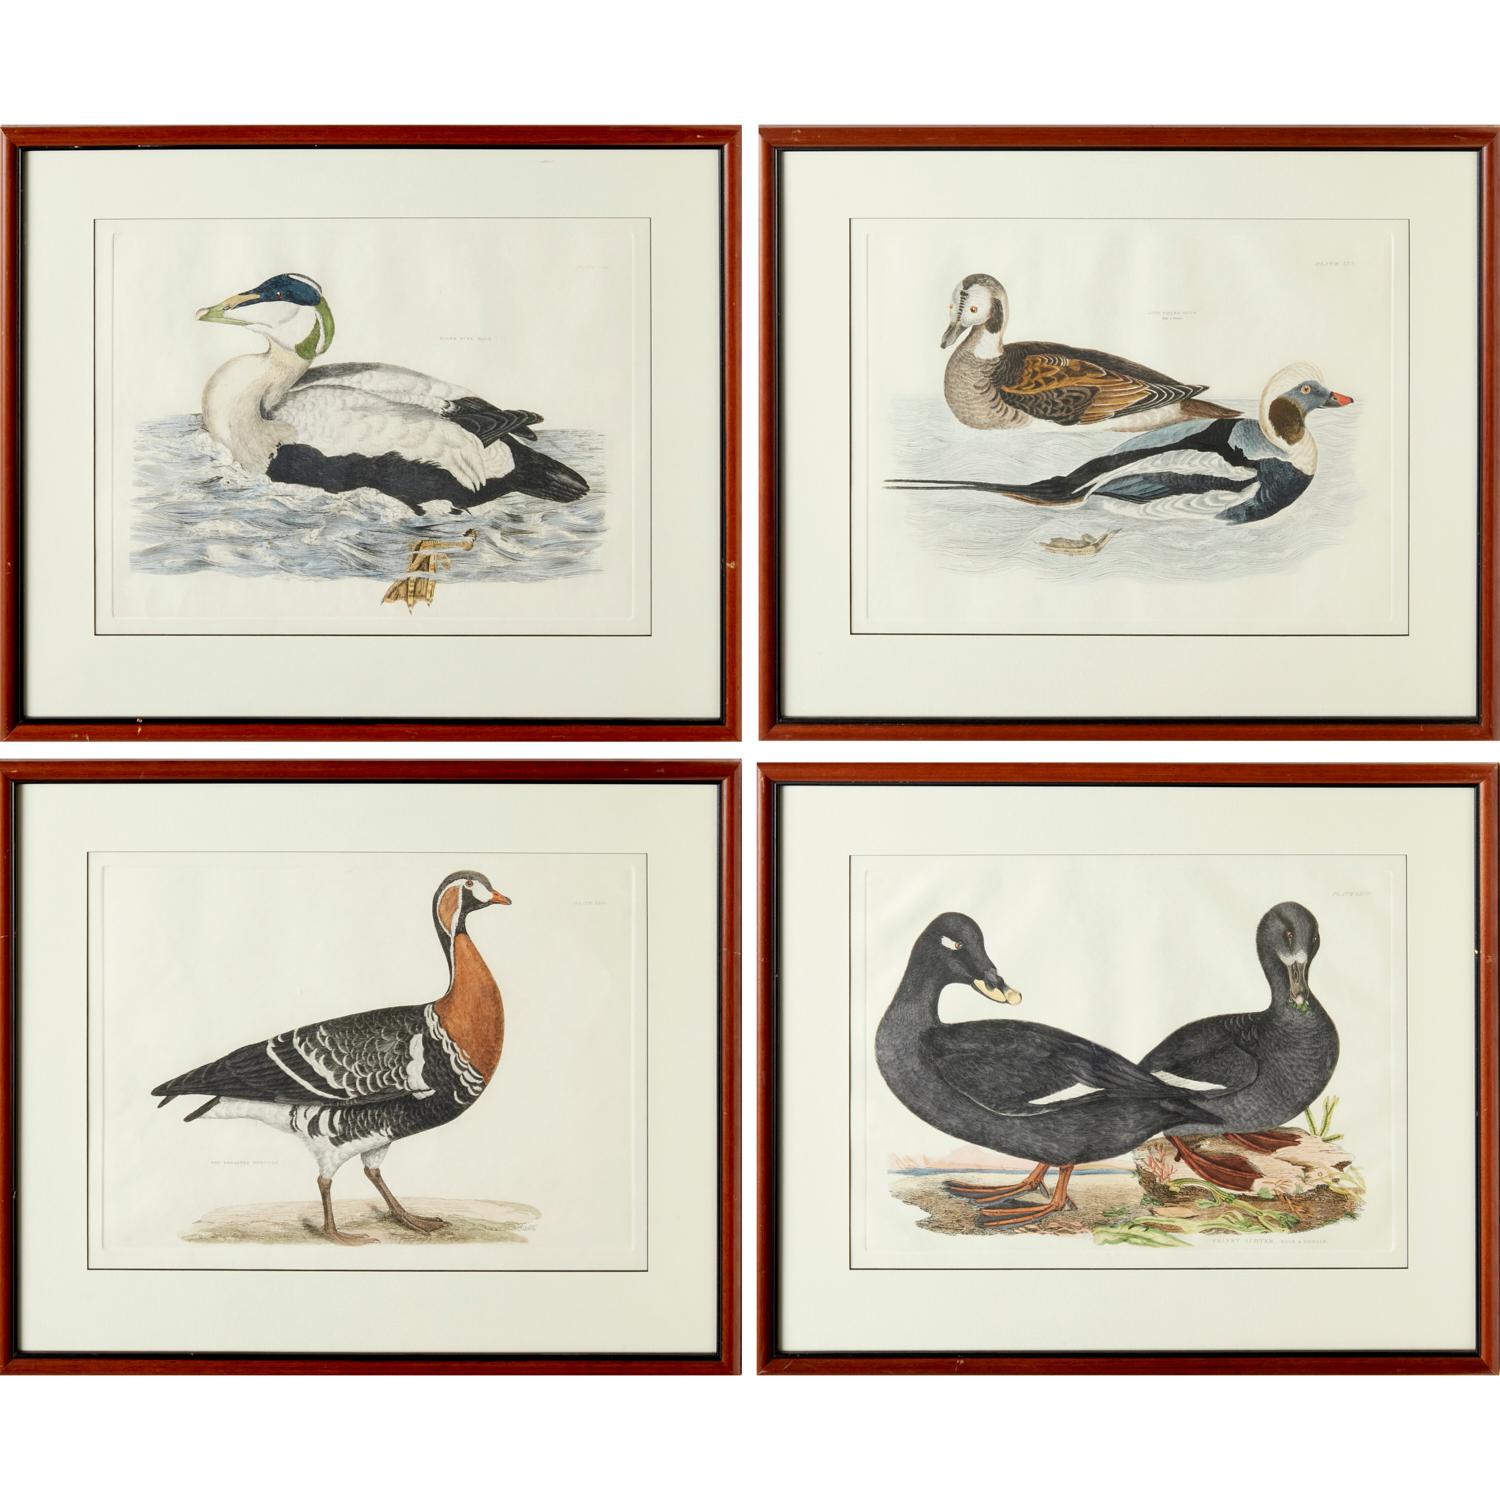 Selby's Illustrations of British Ornithology (London: 1841-1846). Likely a later restrike printing (20th c.,) hand-colored prints, embossed with plate marks, includes: 